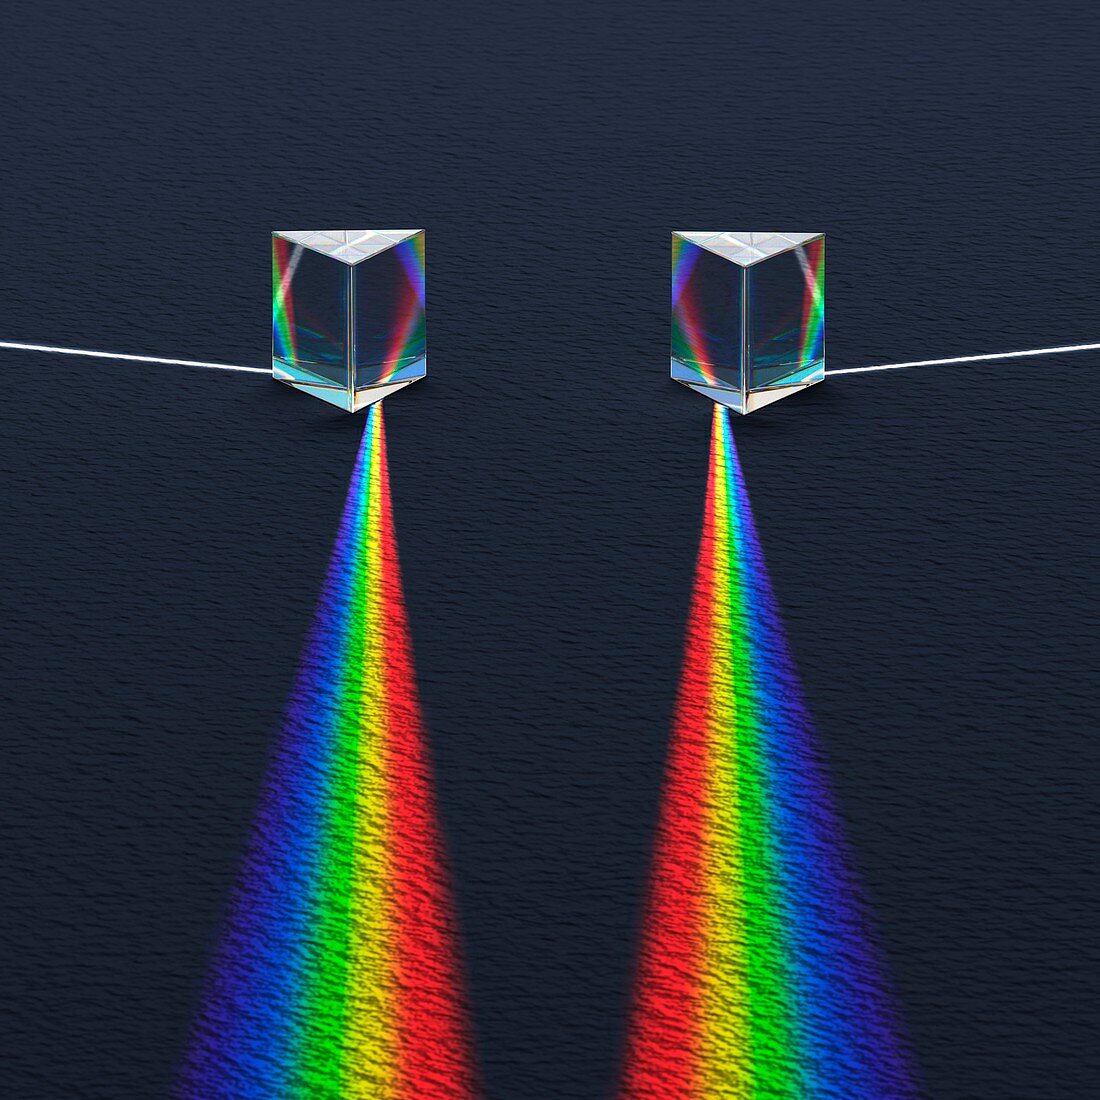 2 Prisms and refracted spectra